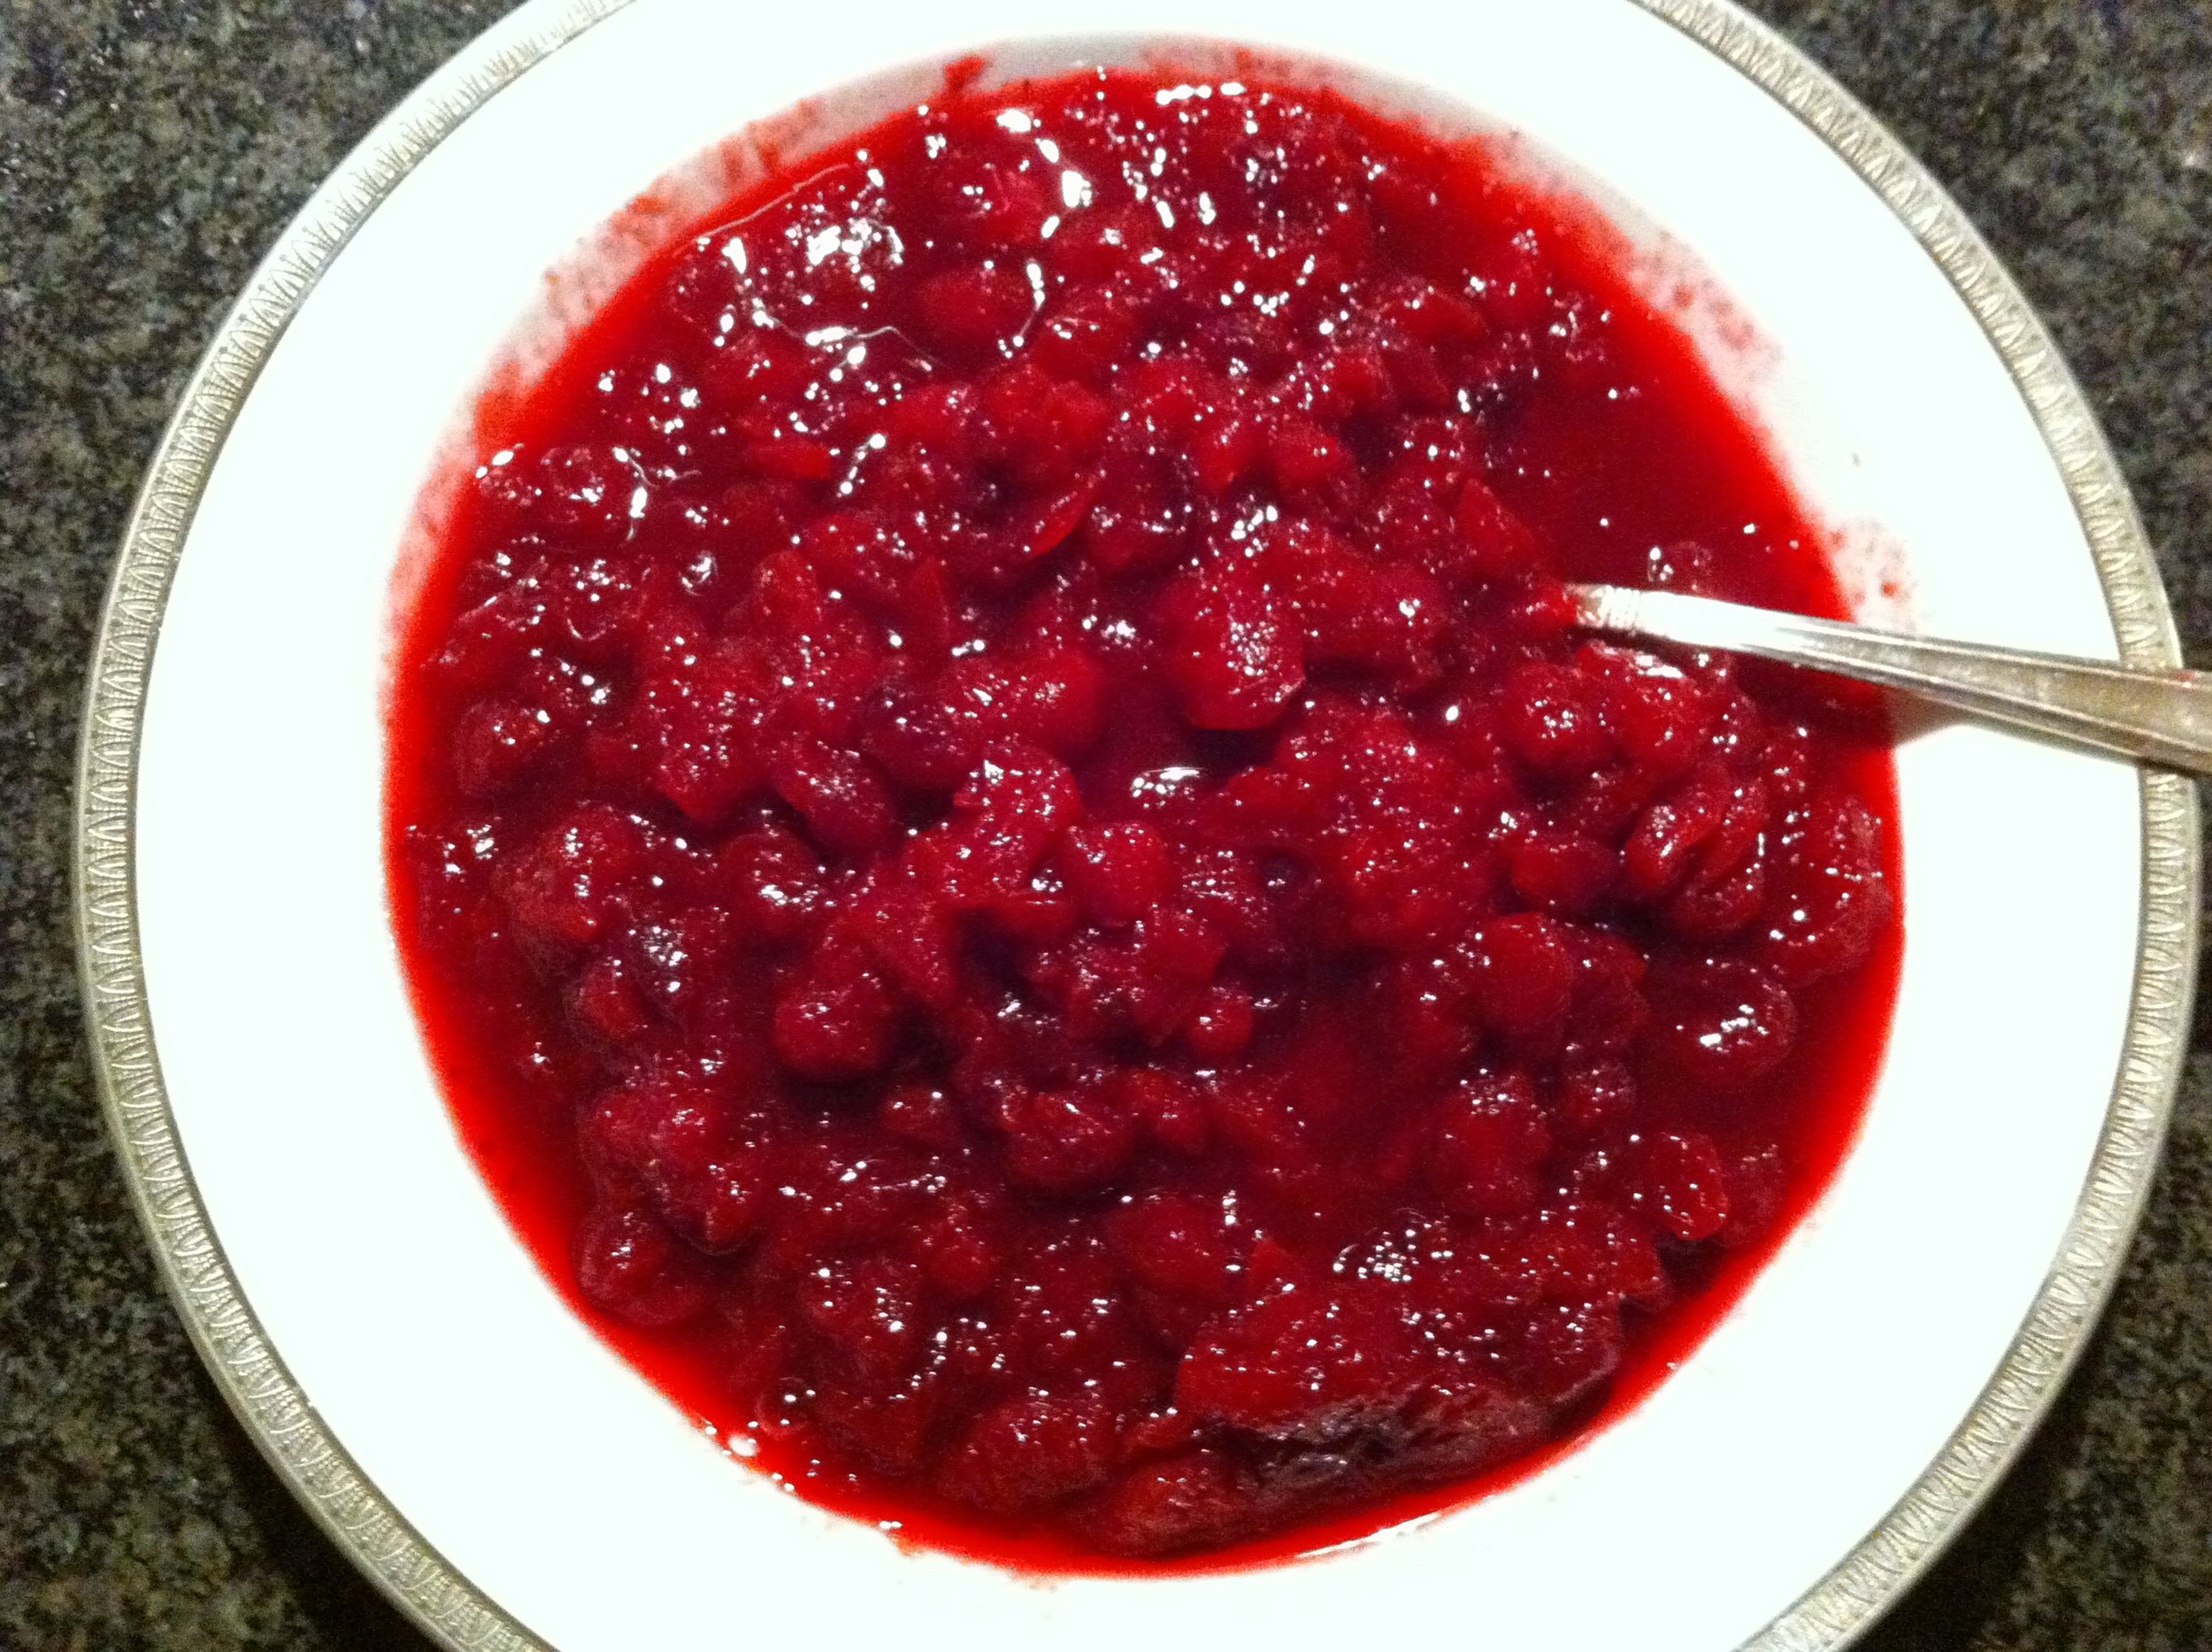 This cranberry sauce is so easy to make and a great addition to the Thanksgiving table.